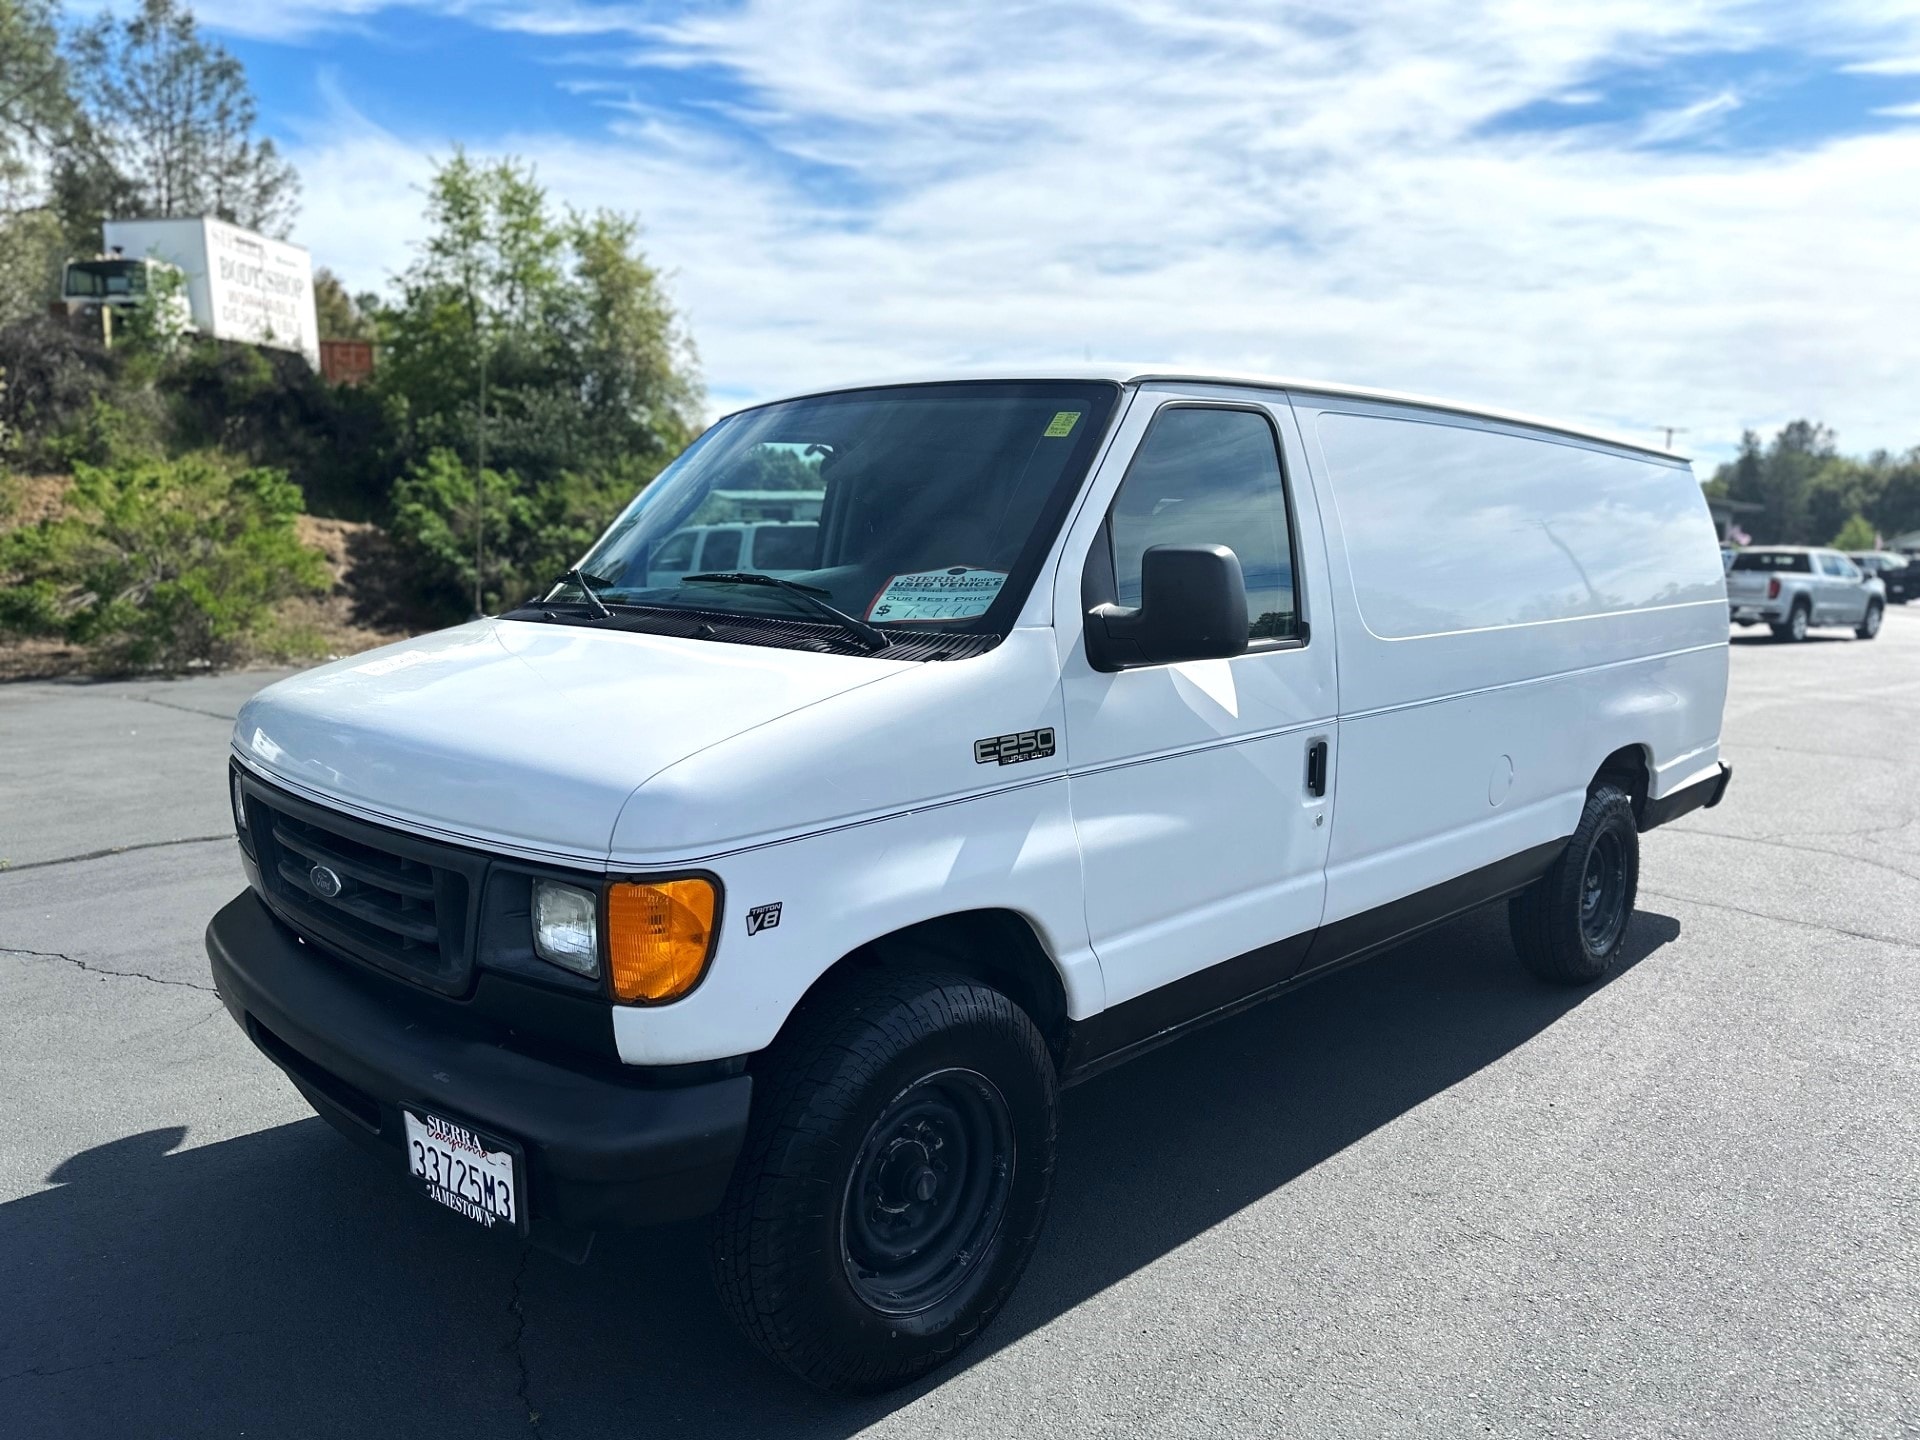 Used 2003 Ford Econoline Van Commercial with VIN 1FTNS24L13HB07841 for sale in Jamestown, CA